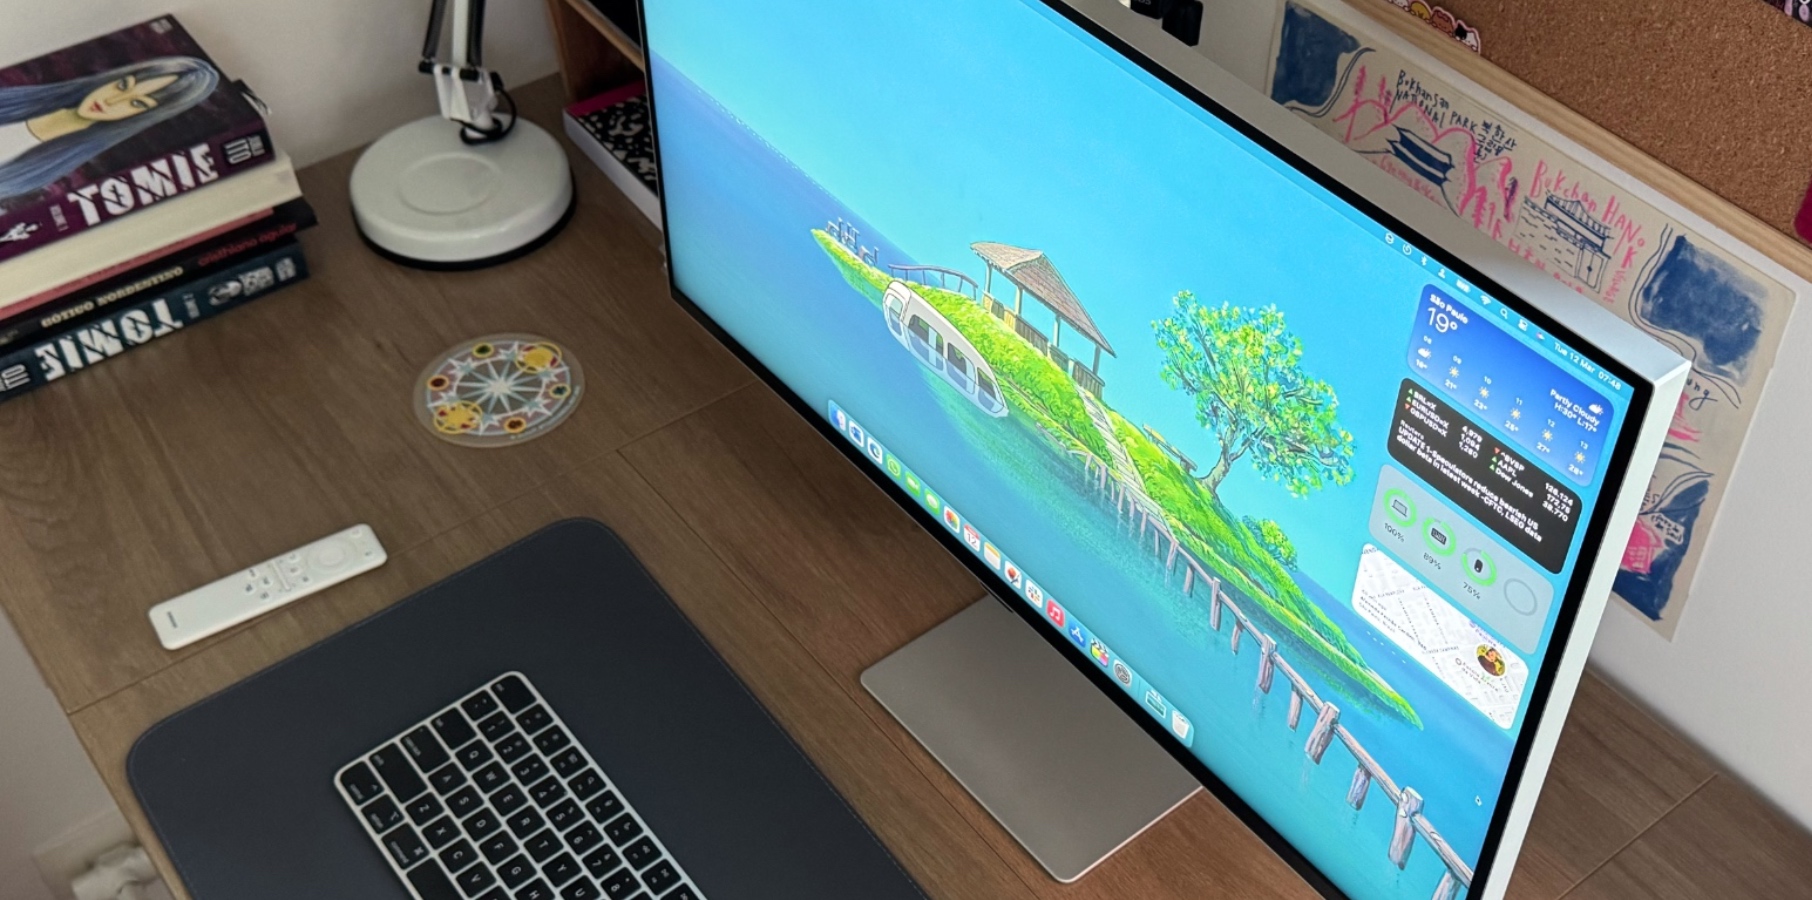 Samsung ViewFinity S9 review: Can it replace my Apple Studio Display?